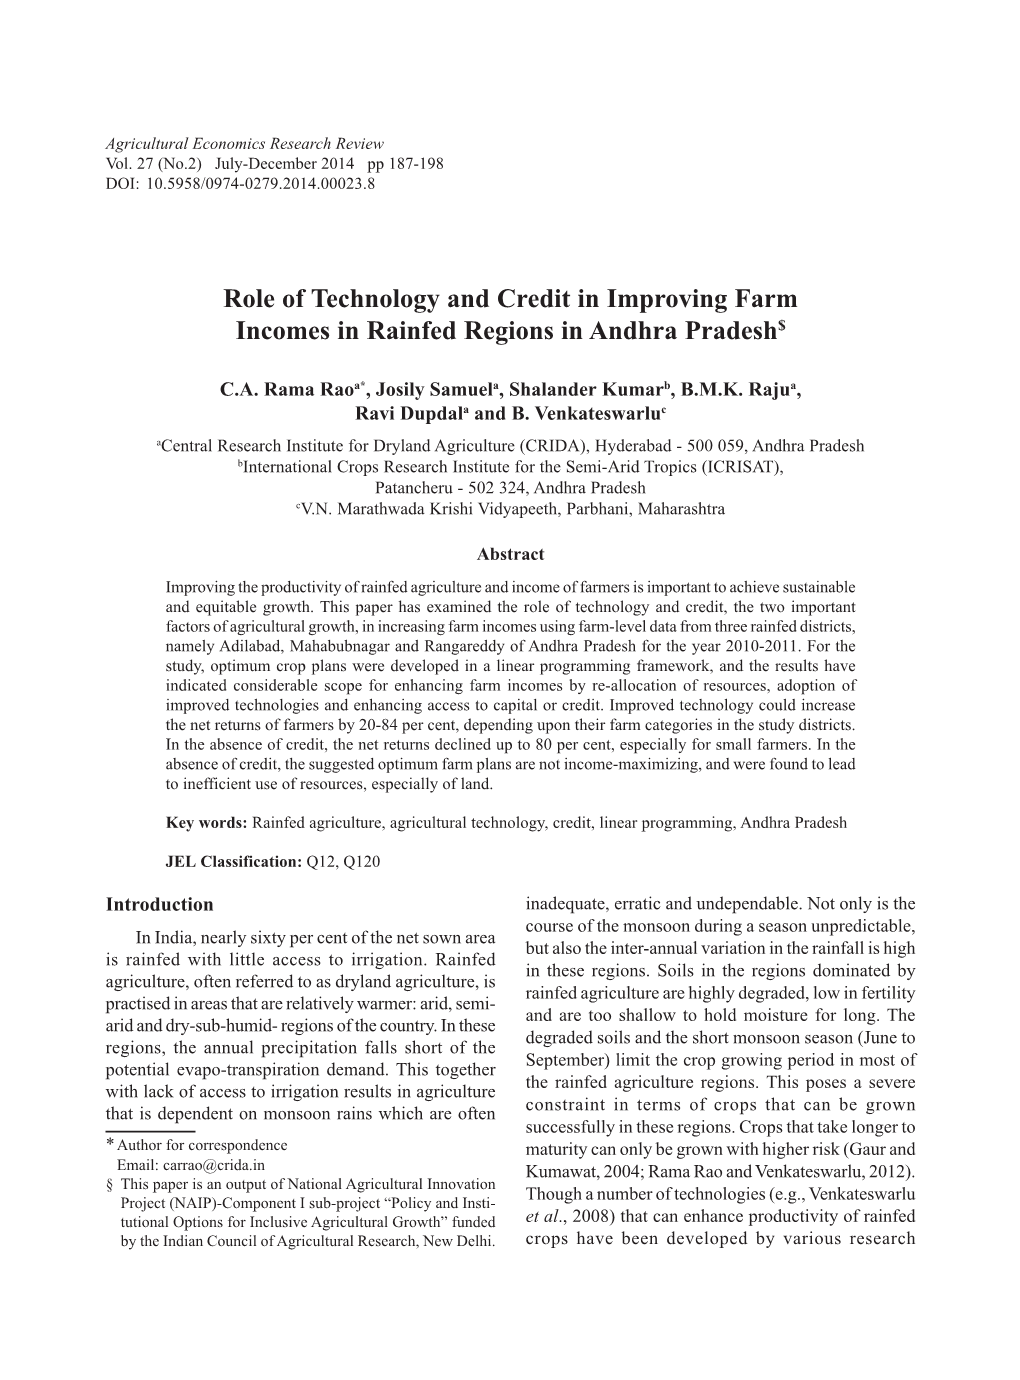 Role of Technology and Credit in Improving Farm Incomes in Rainfed Regions in Andhra Pradesh$